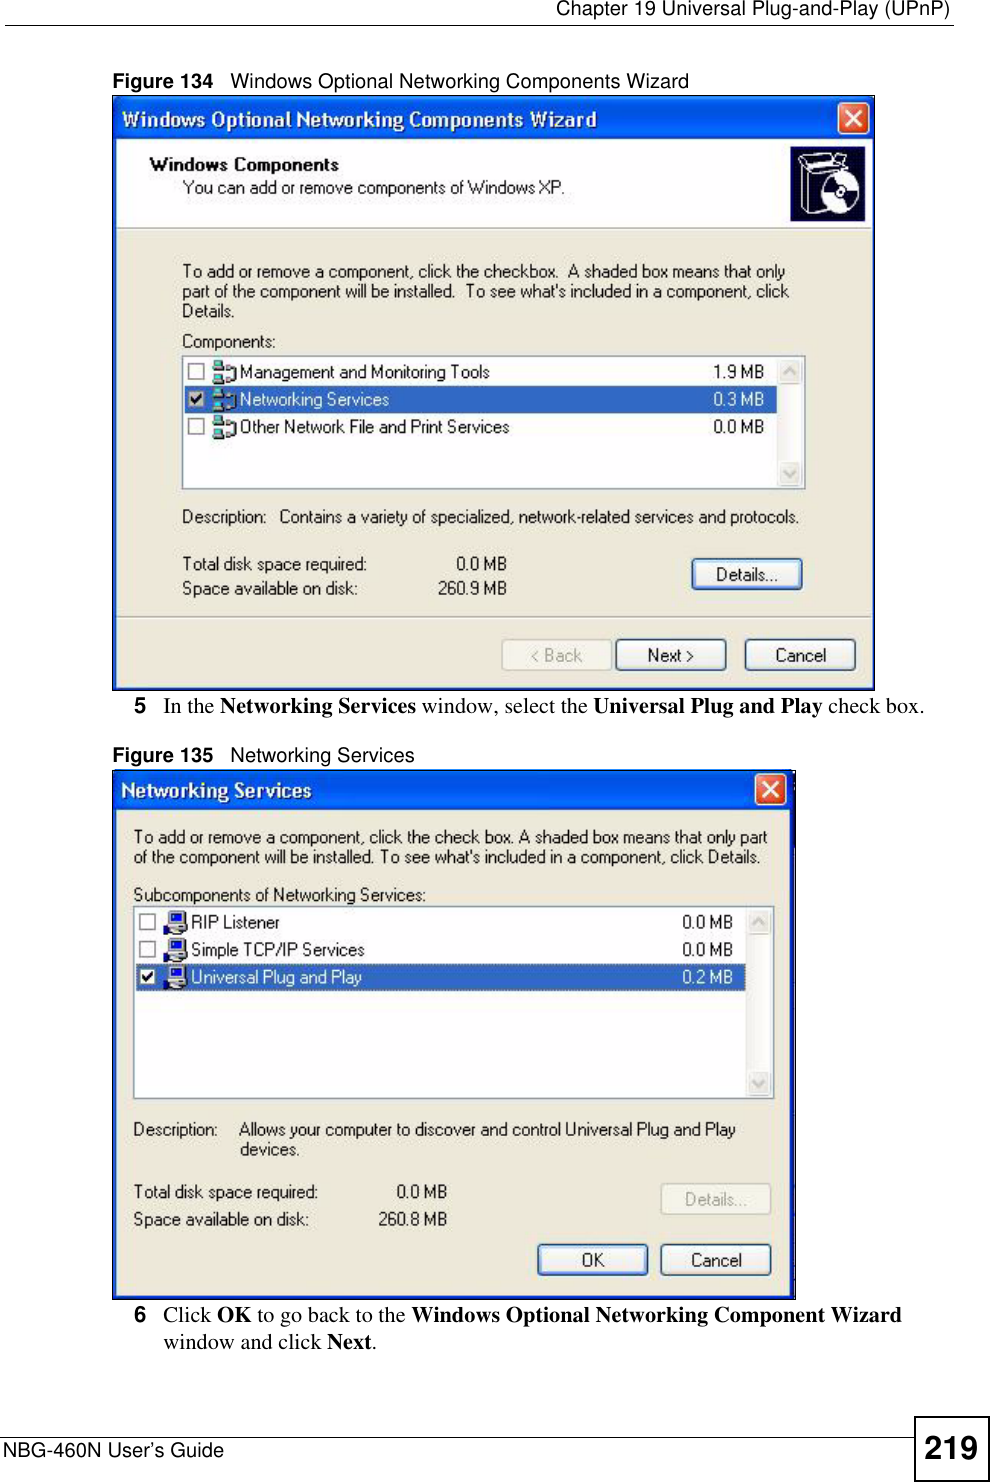  Chapter 19 Universal Plug-and-Play (UPnP)NBG-460N User’s Guide 219Figure 134   Windows Optional Networking Components Wizard5In the Networking Services window, select the Universal Plug and Play check box. Figure 135   Networking Services6Click OK to go back to the Windows Optional Networking Component Wizard window and click Next.